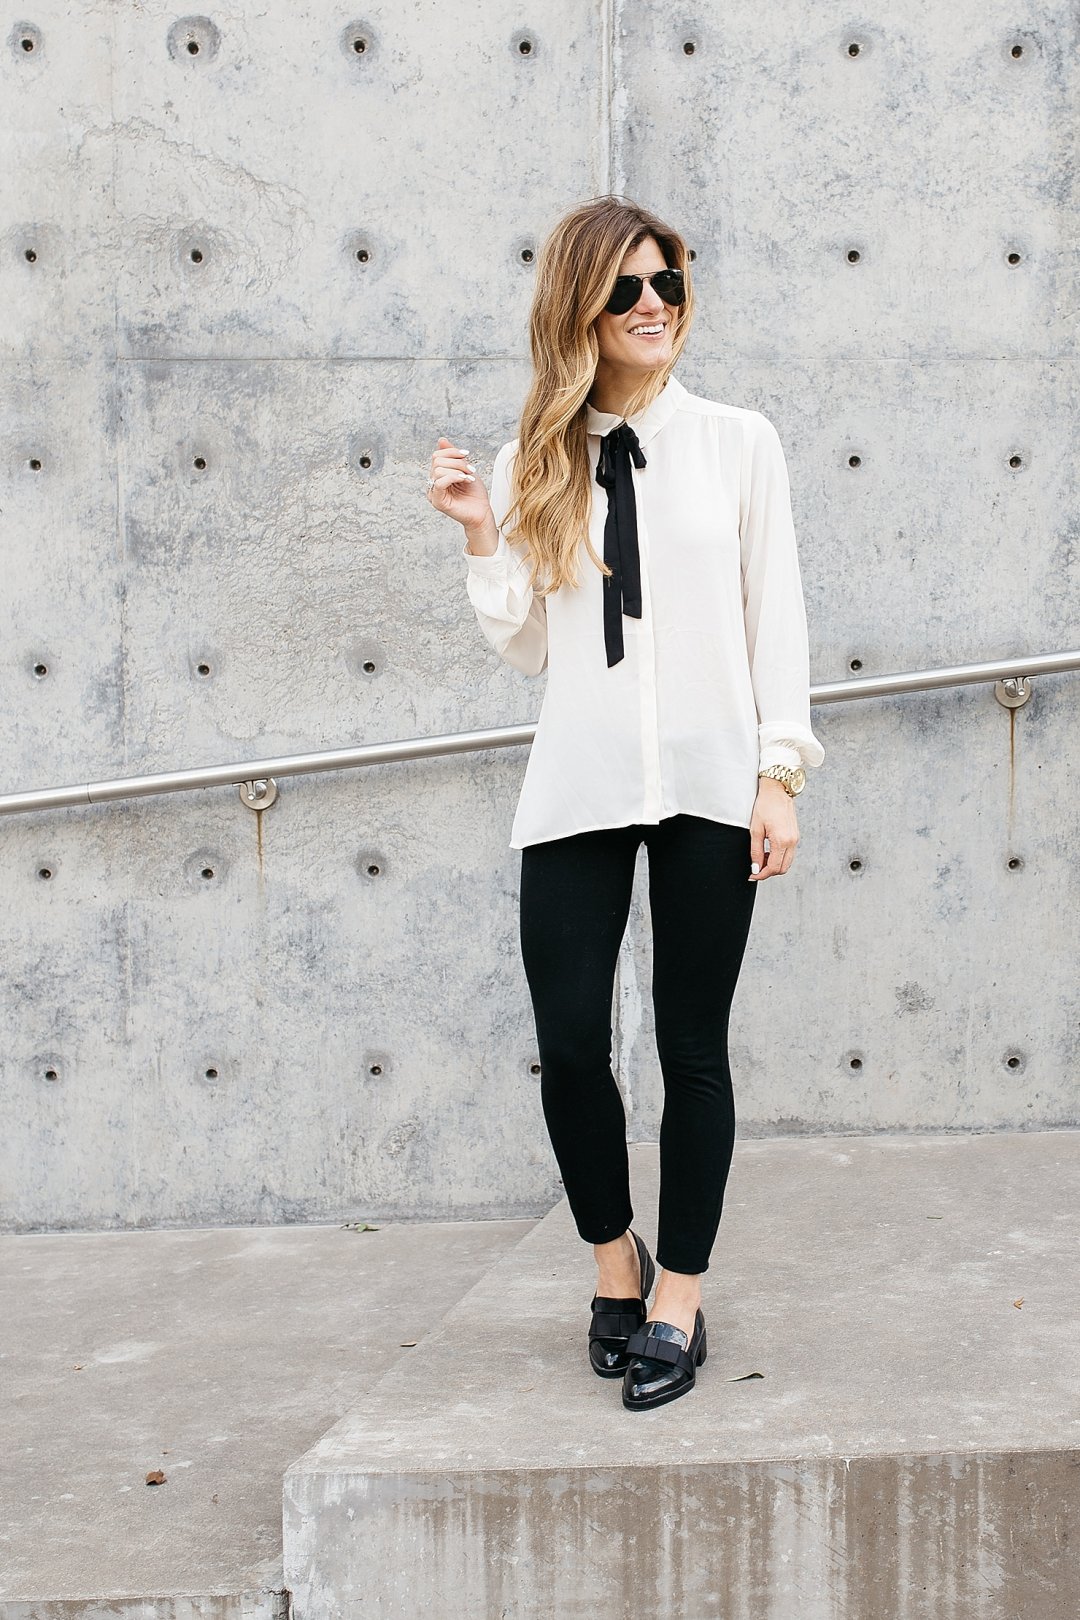 Fall Business Casual Outfit - Chic 